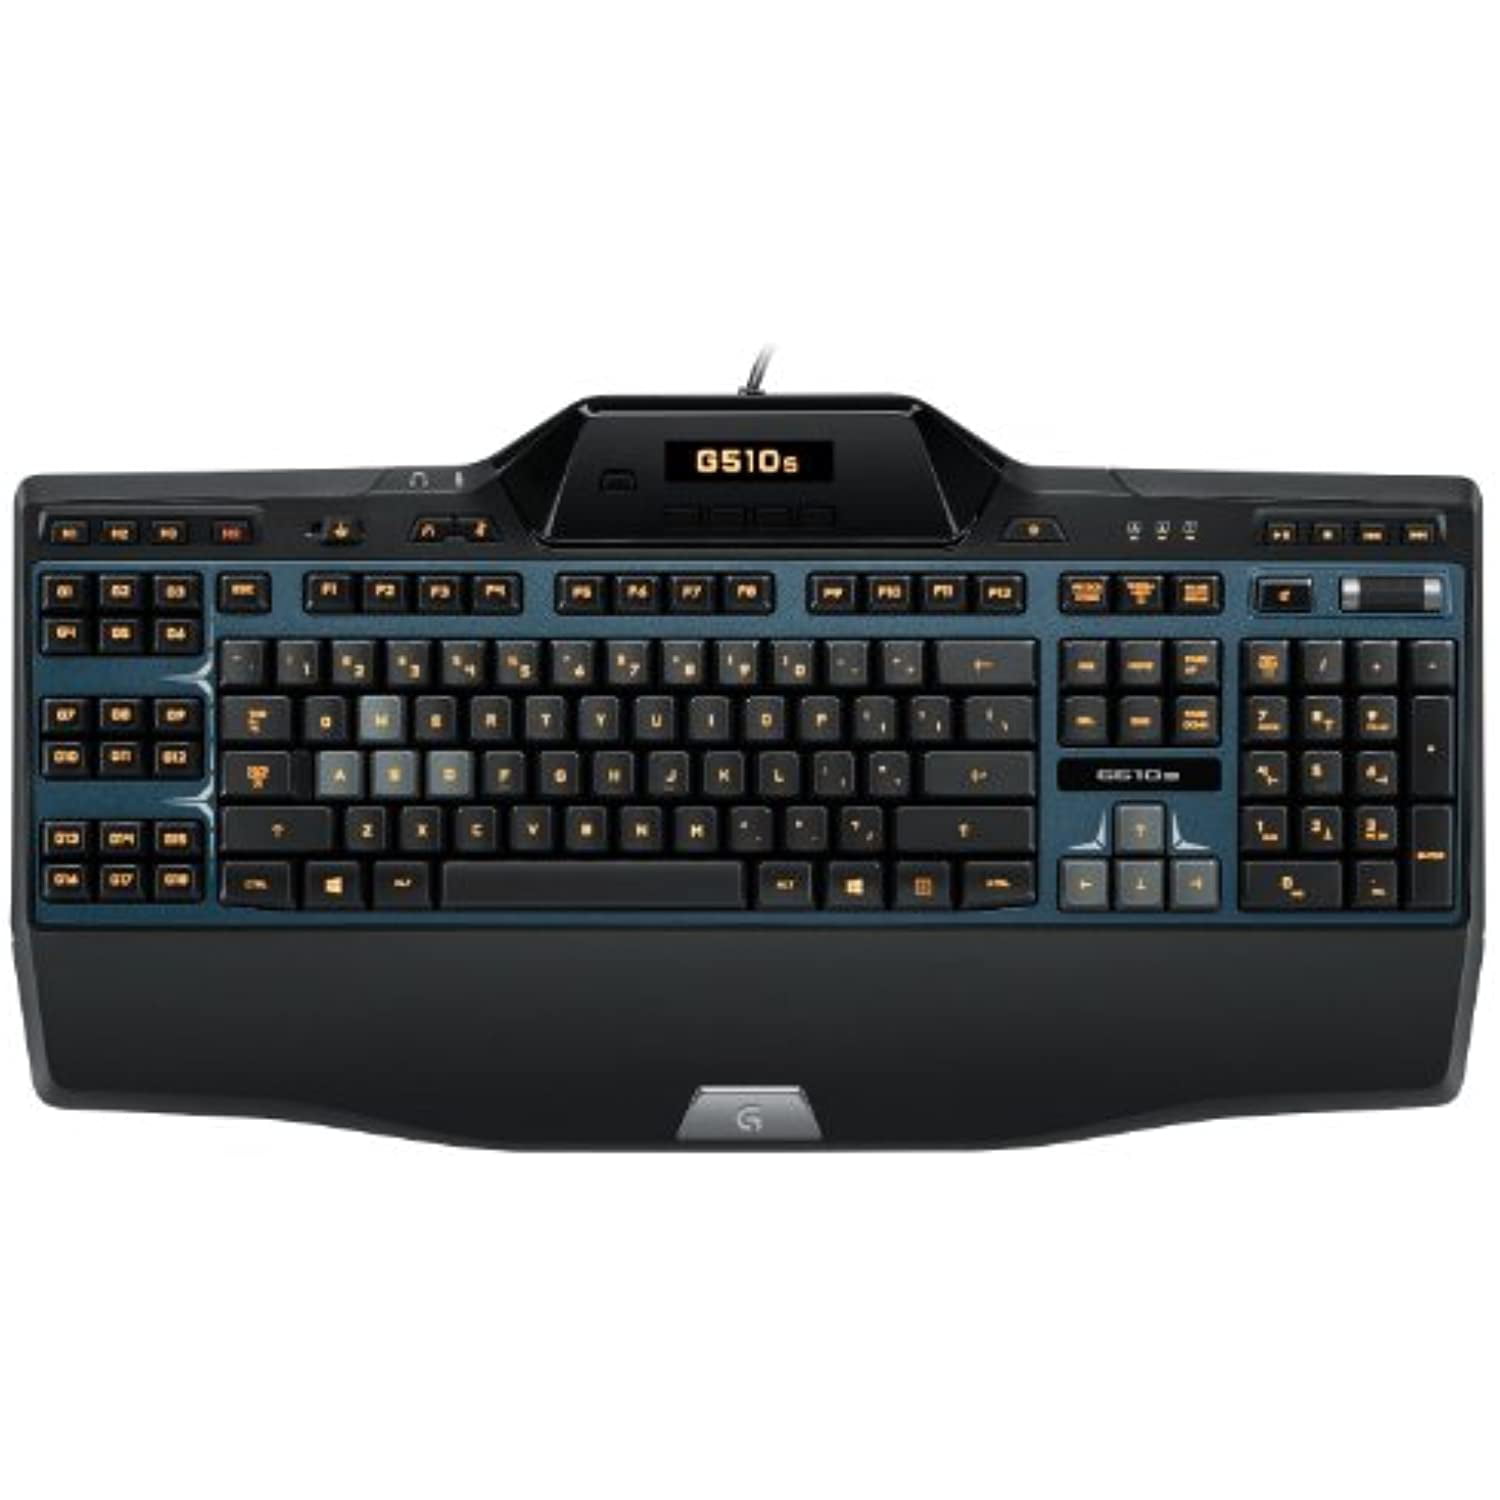 Logitech G510s Gaming Keyboard With Game Panel Lcd -